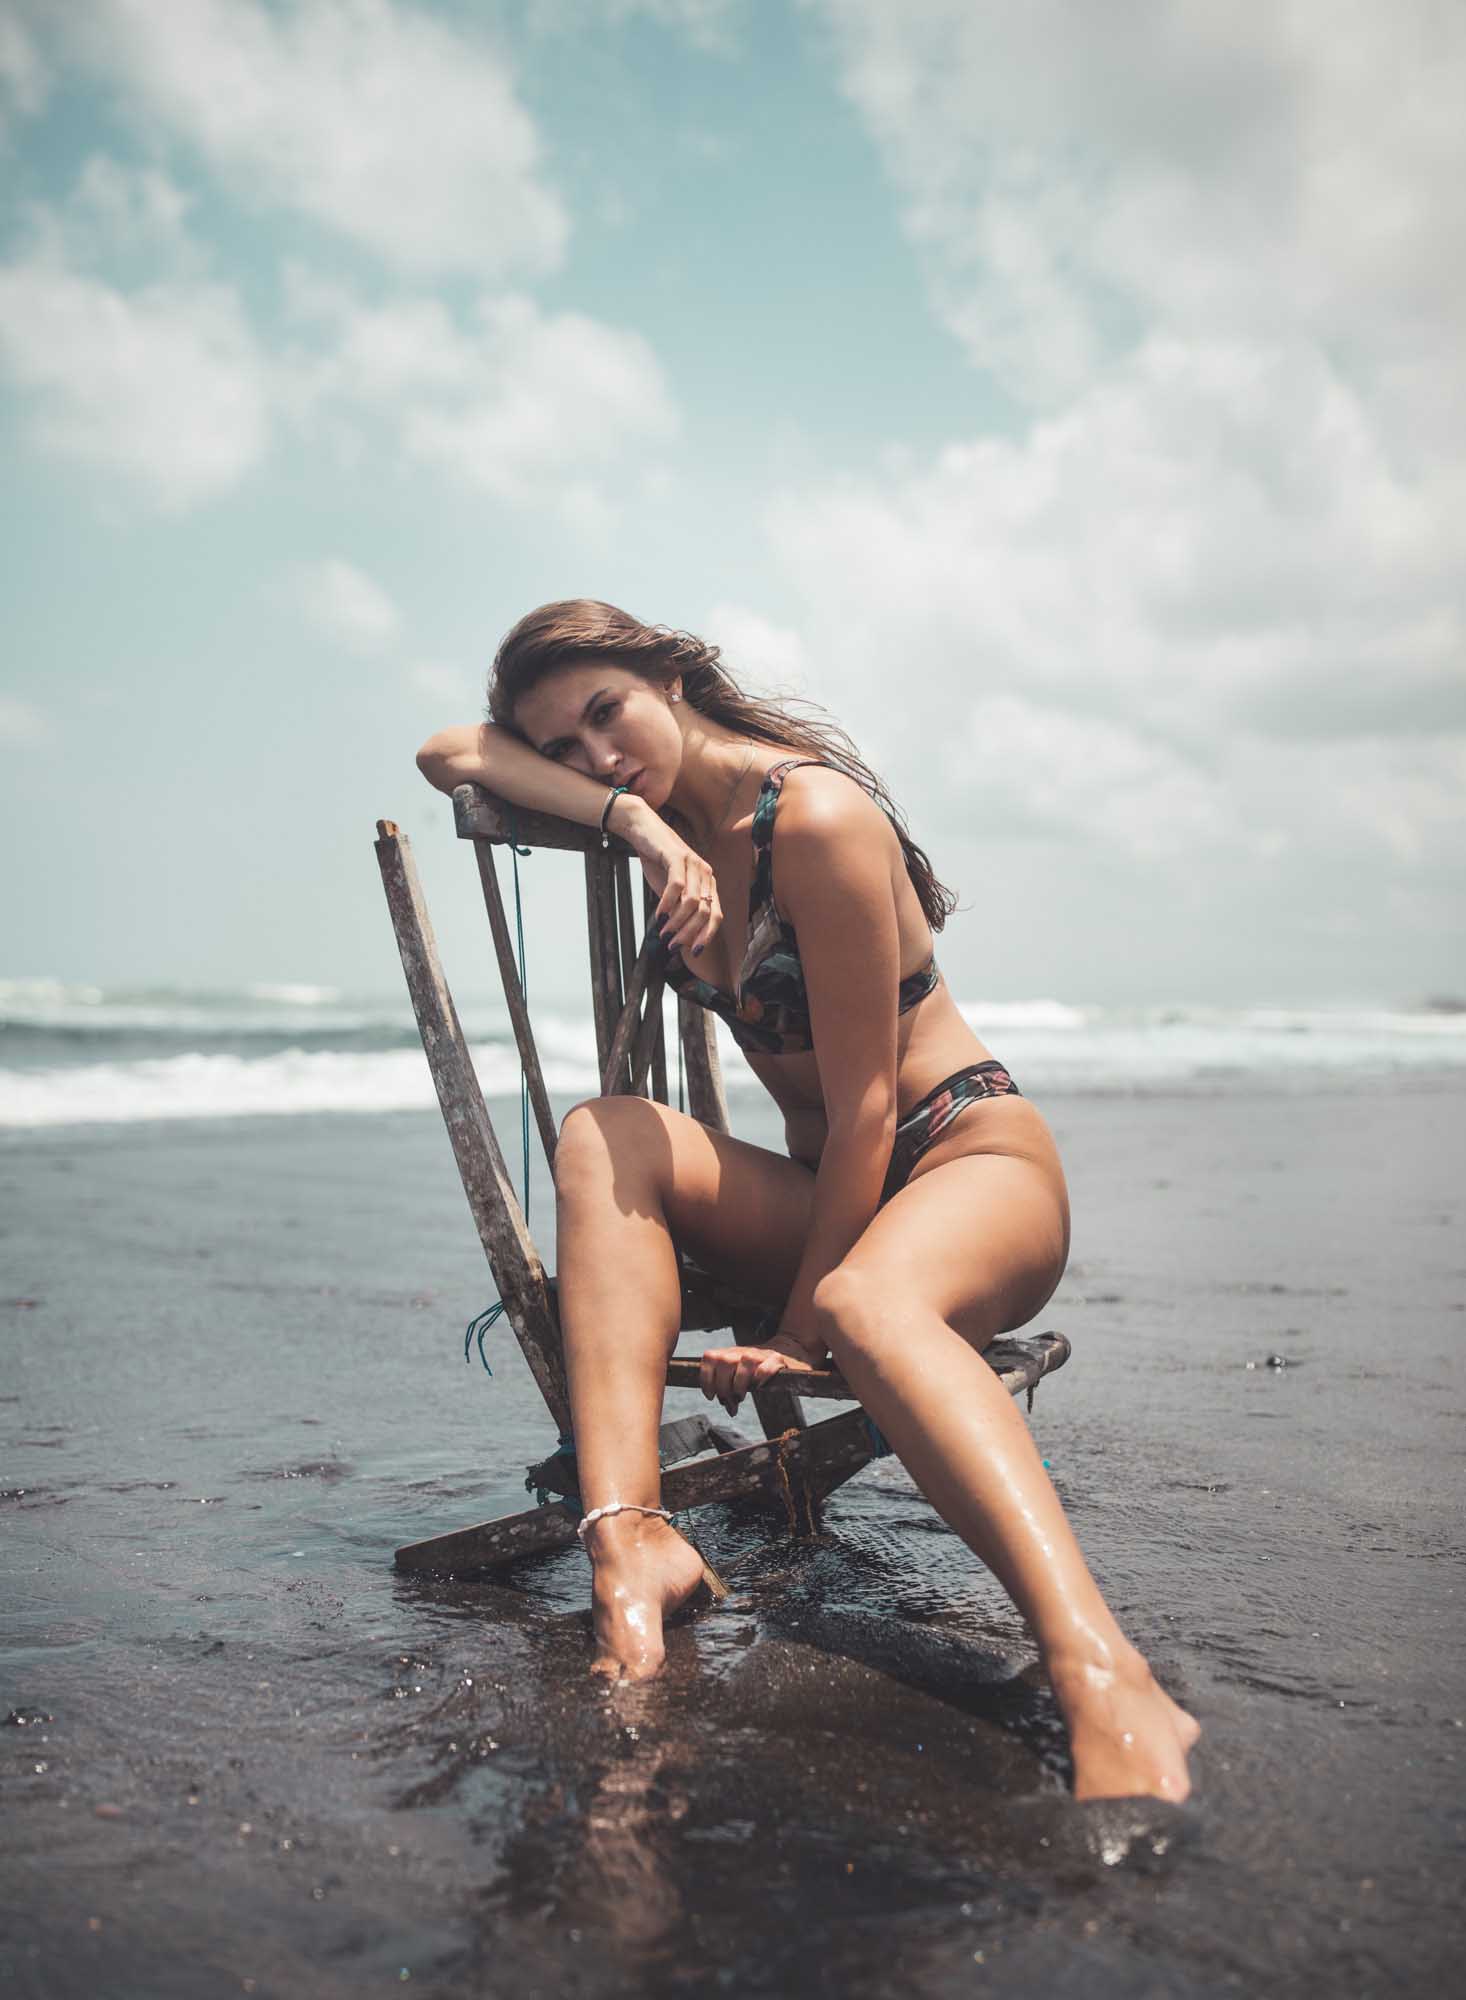 Beautiful woman in models on an abandoned chair on the beach | Fashion Photography | Portrait | Lifestyle Photography | Pantai Mangening,Bali, Indonesia | Swimwear | Denver Photographer |